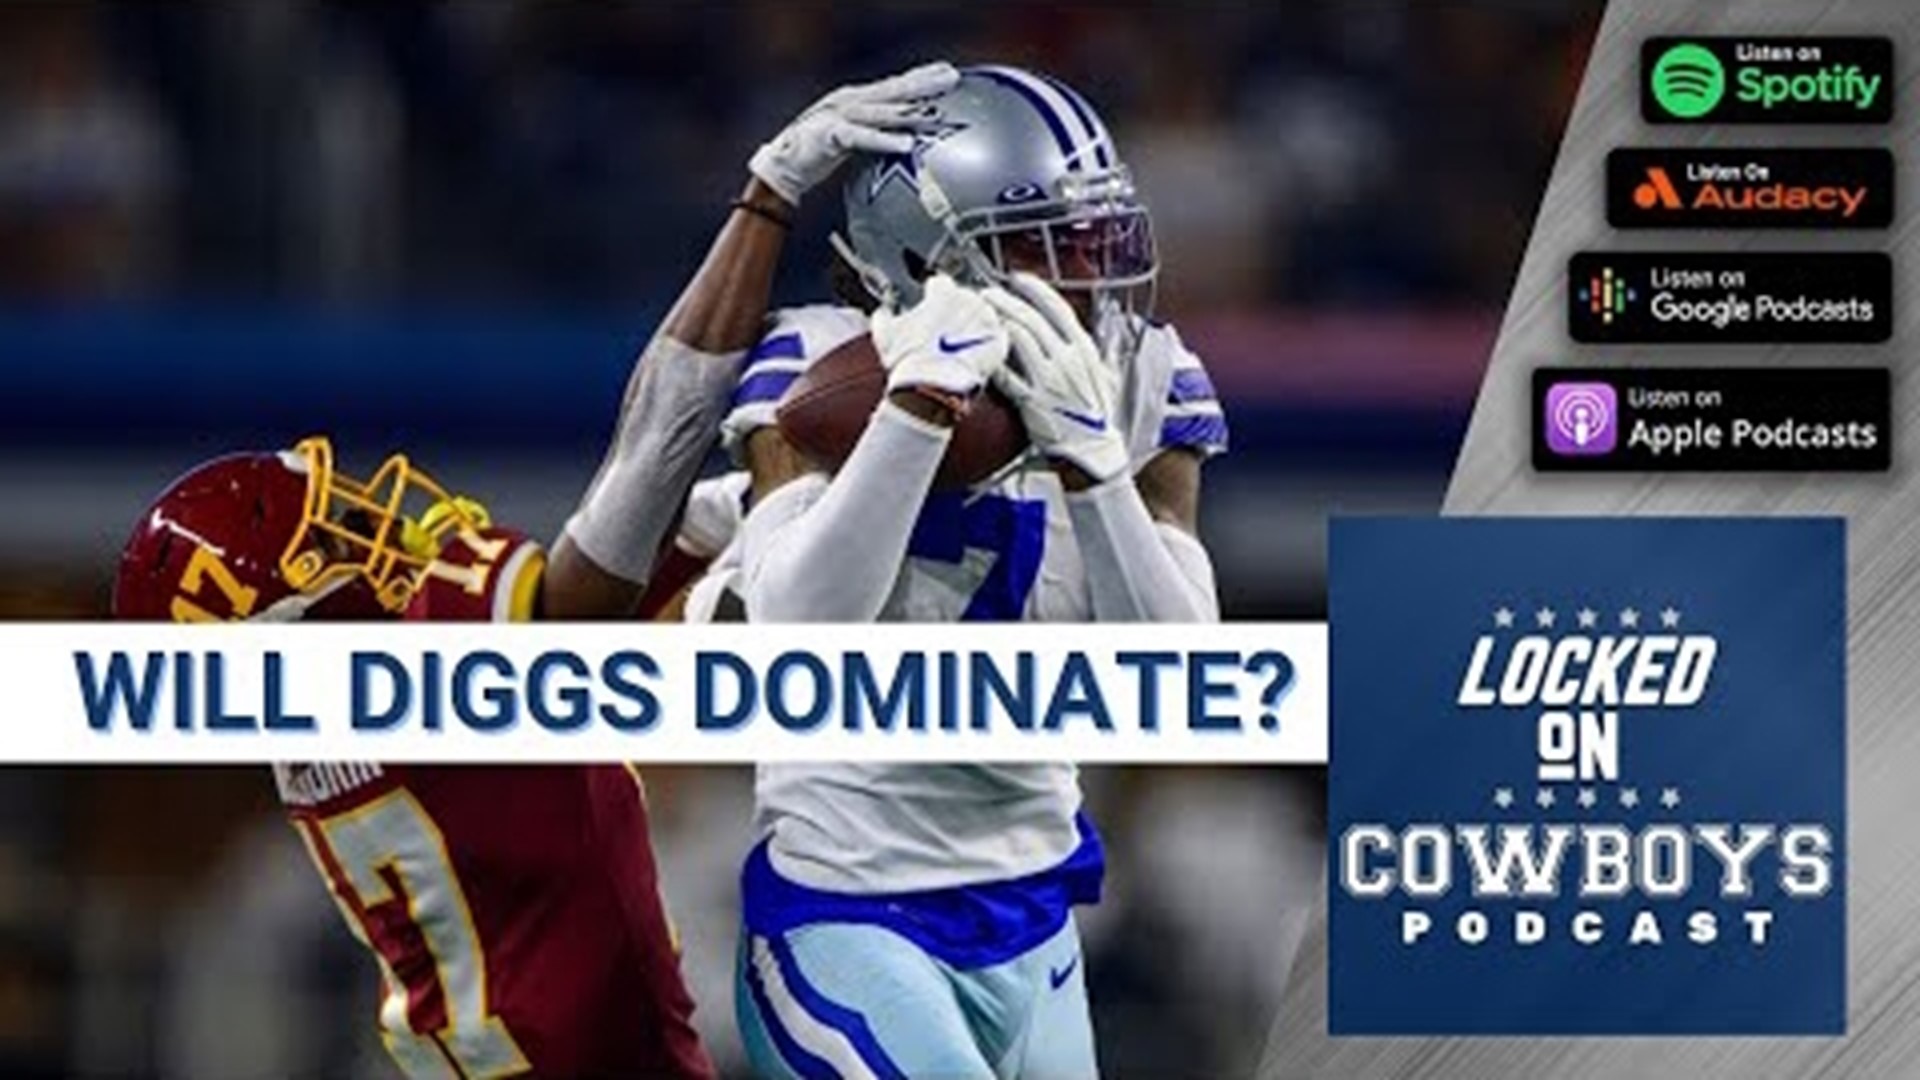 Marcus Mosher and  Landon McCool of Locked On Cowboys preview the Week 4 matchup between the Washington Commanders and the Dallas Cowboys.